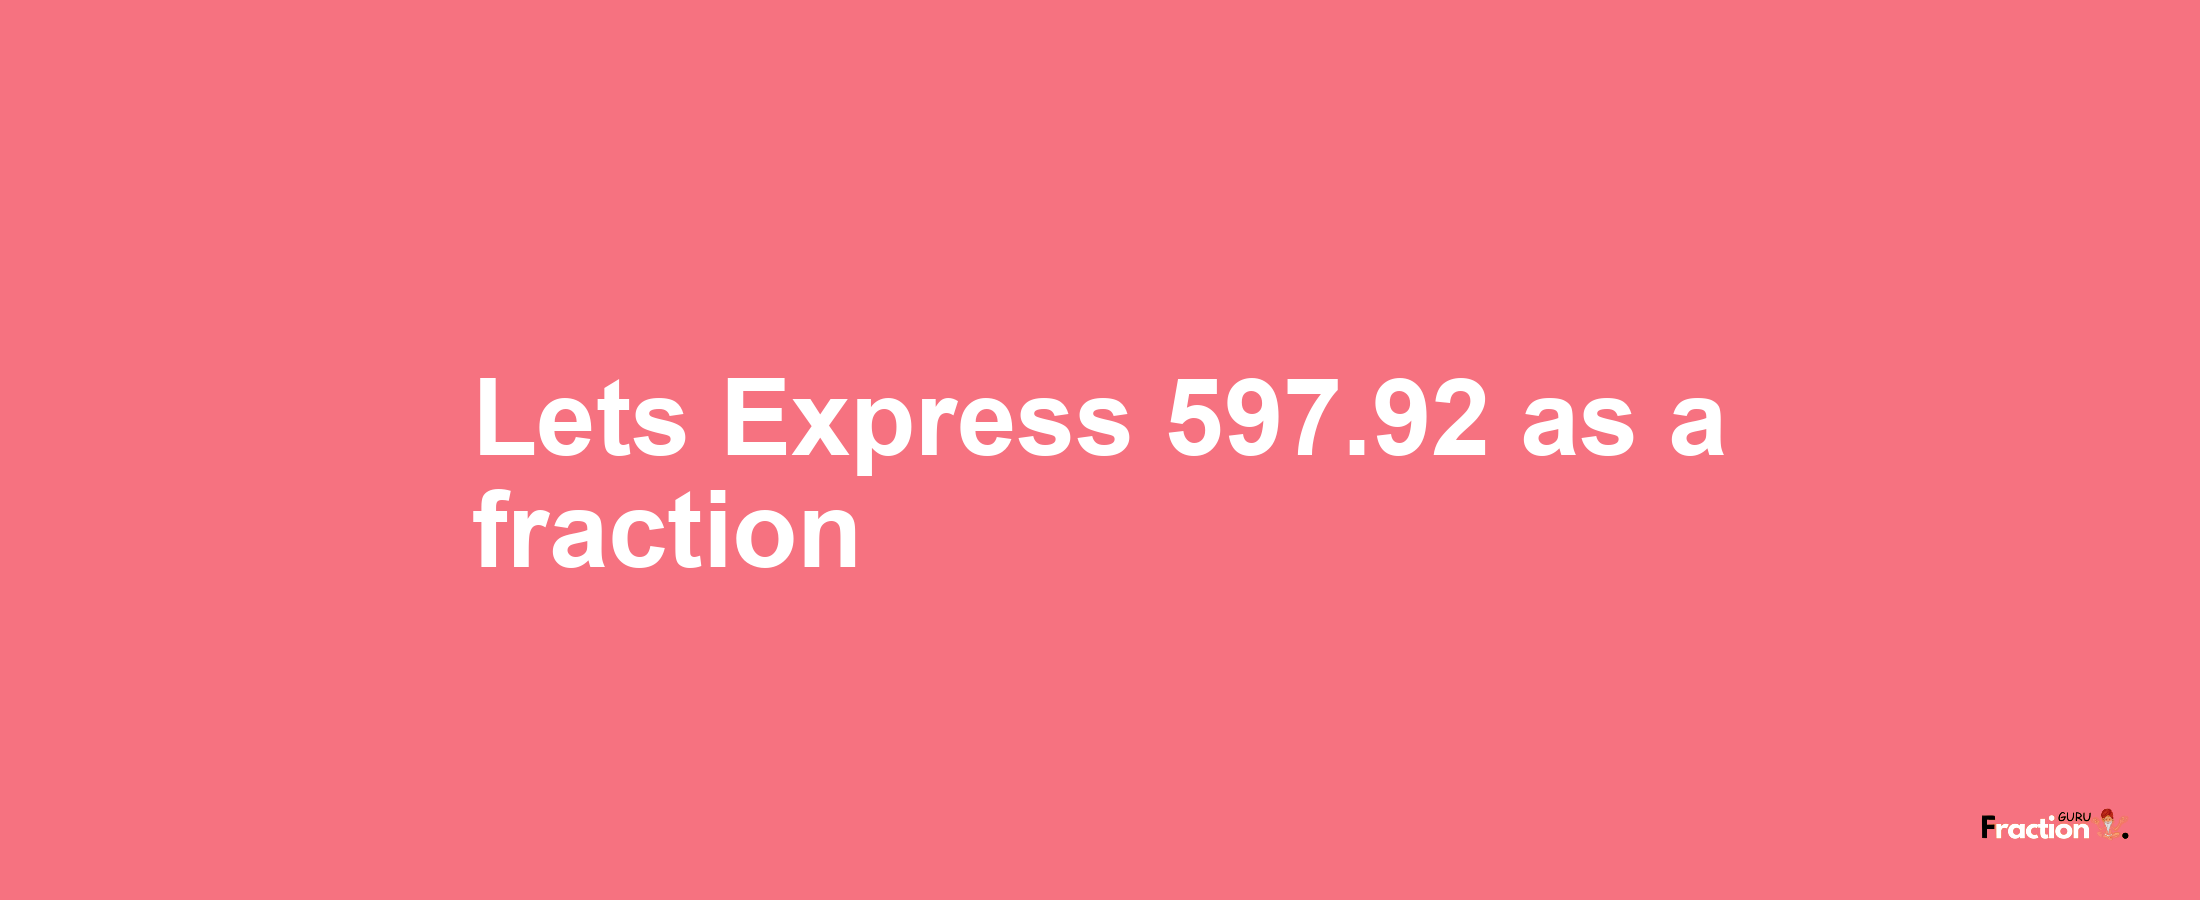 Lets Express 597.92 as afraction